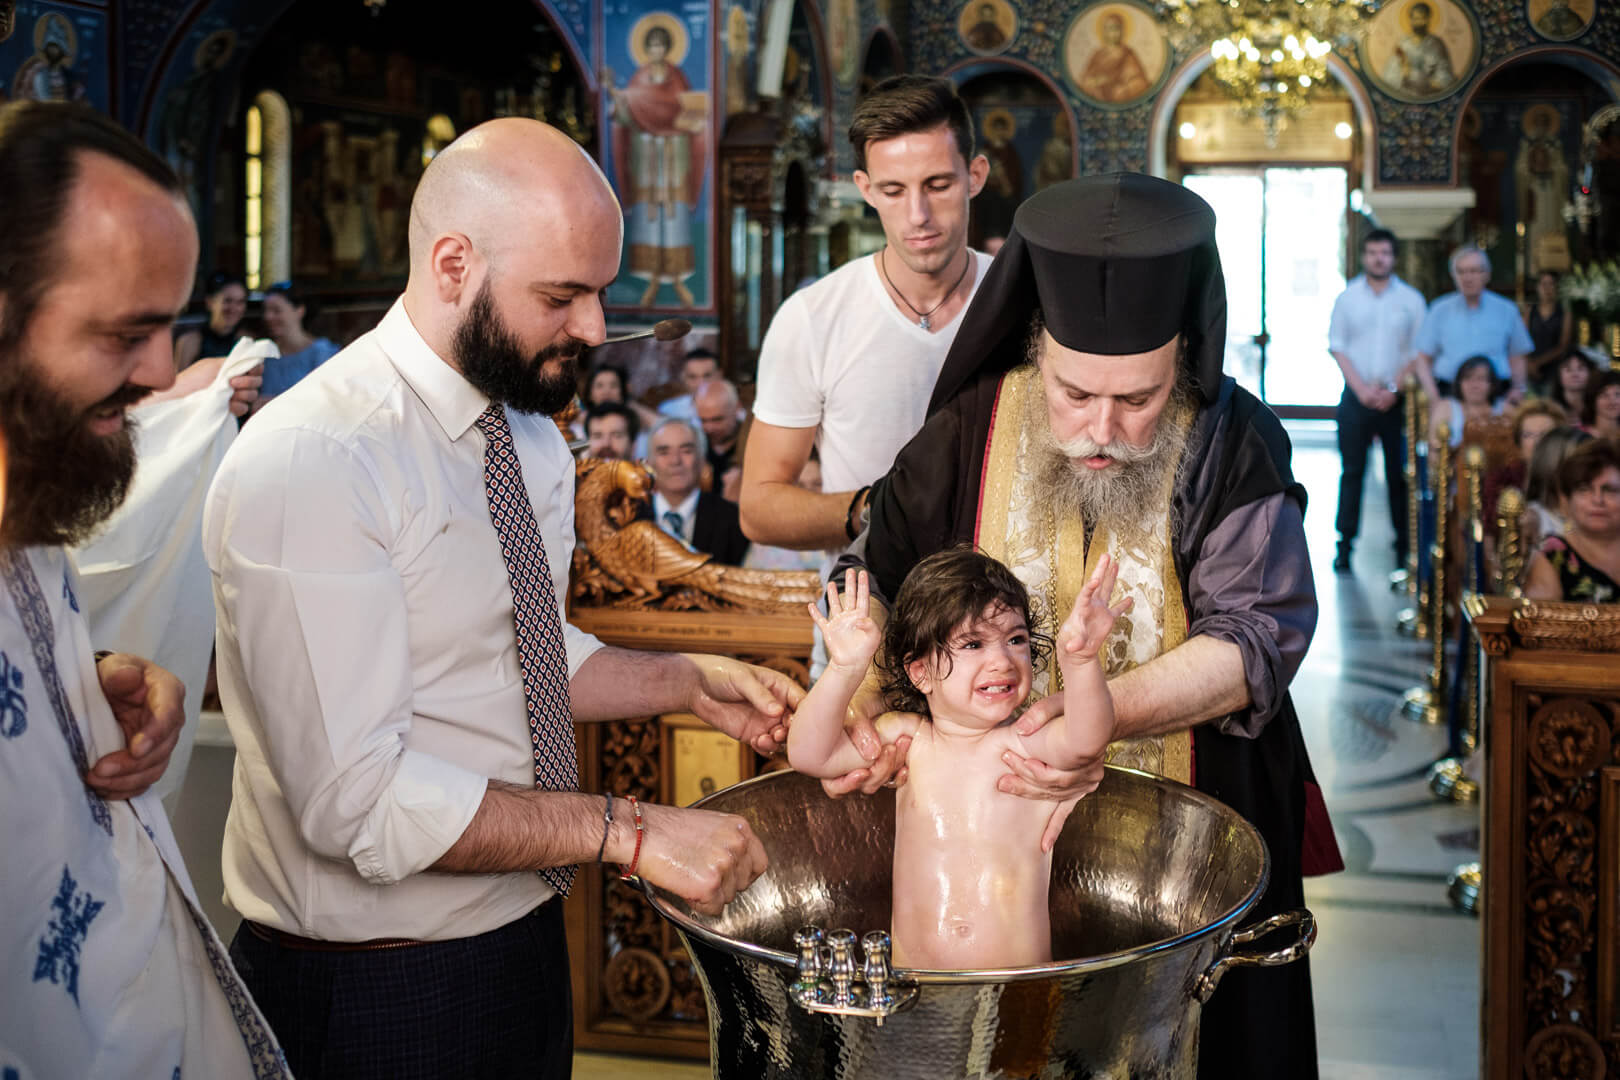 Joyful christening moment: baby smiles happily as holy water is poured during the ceremony.